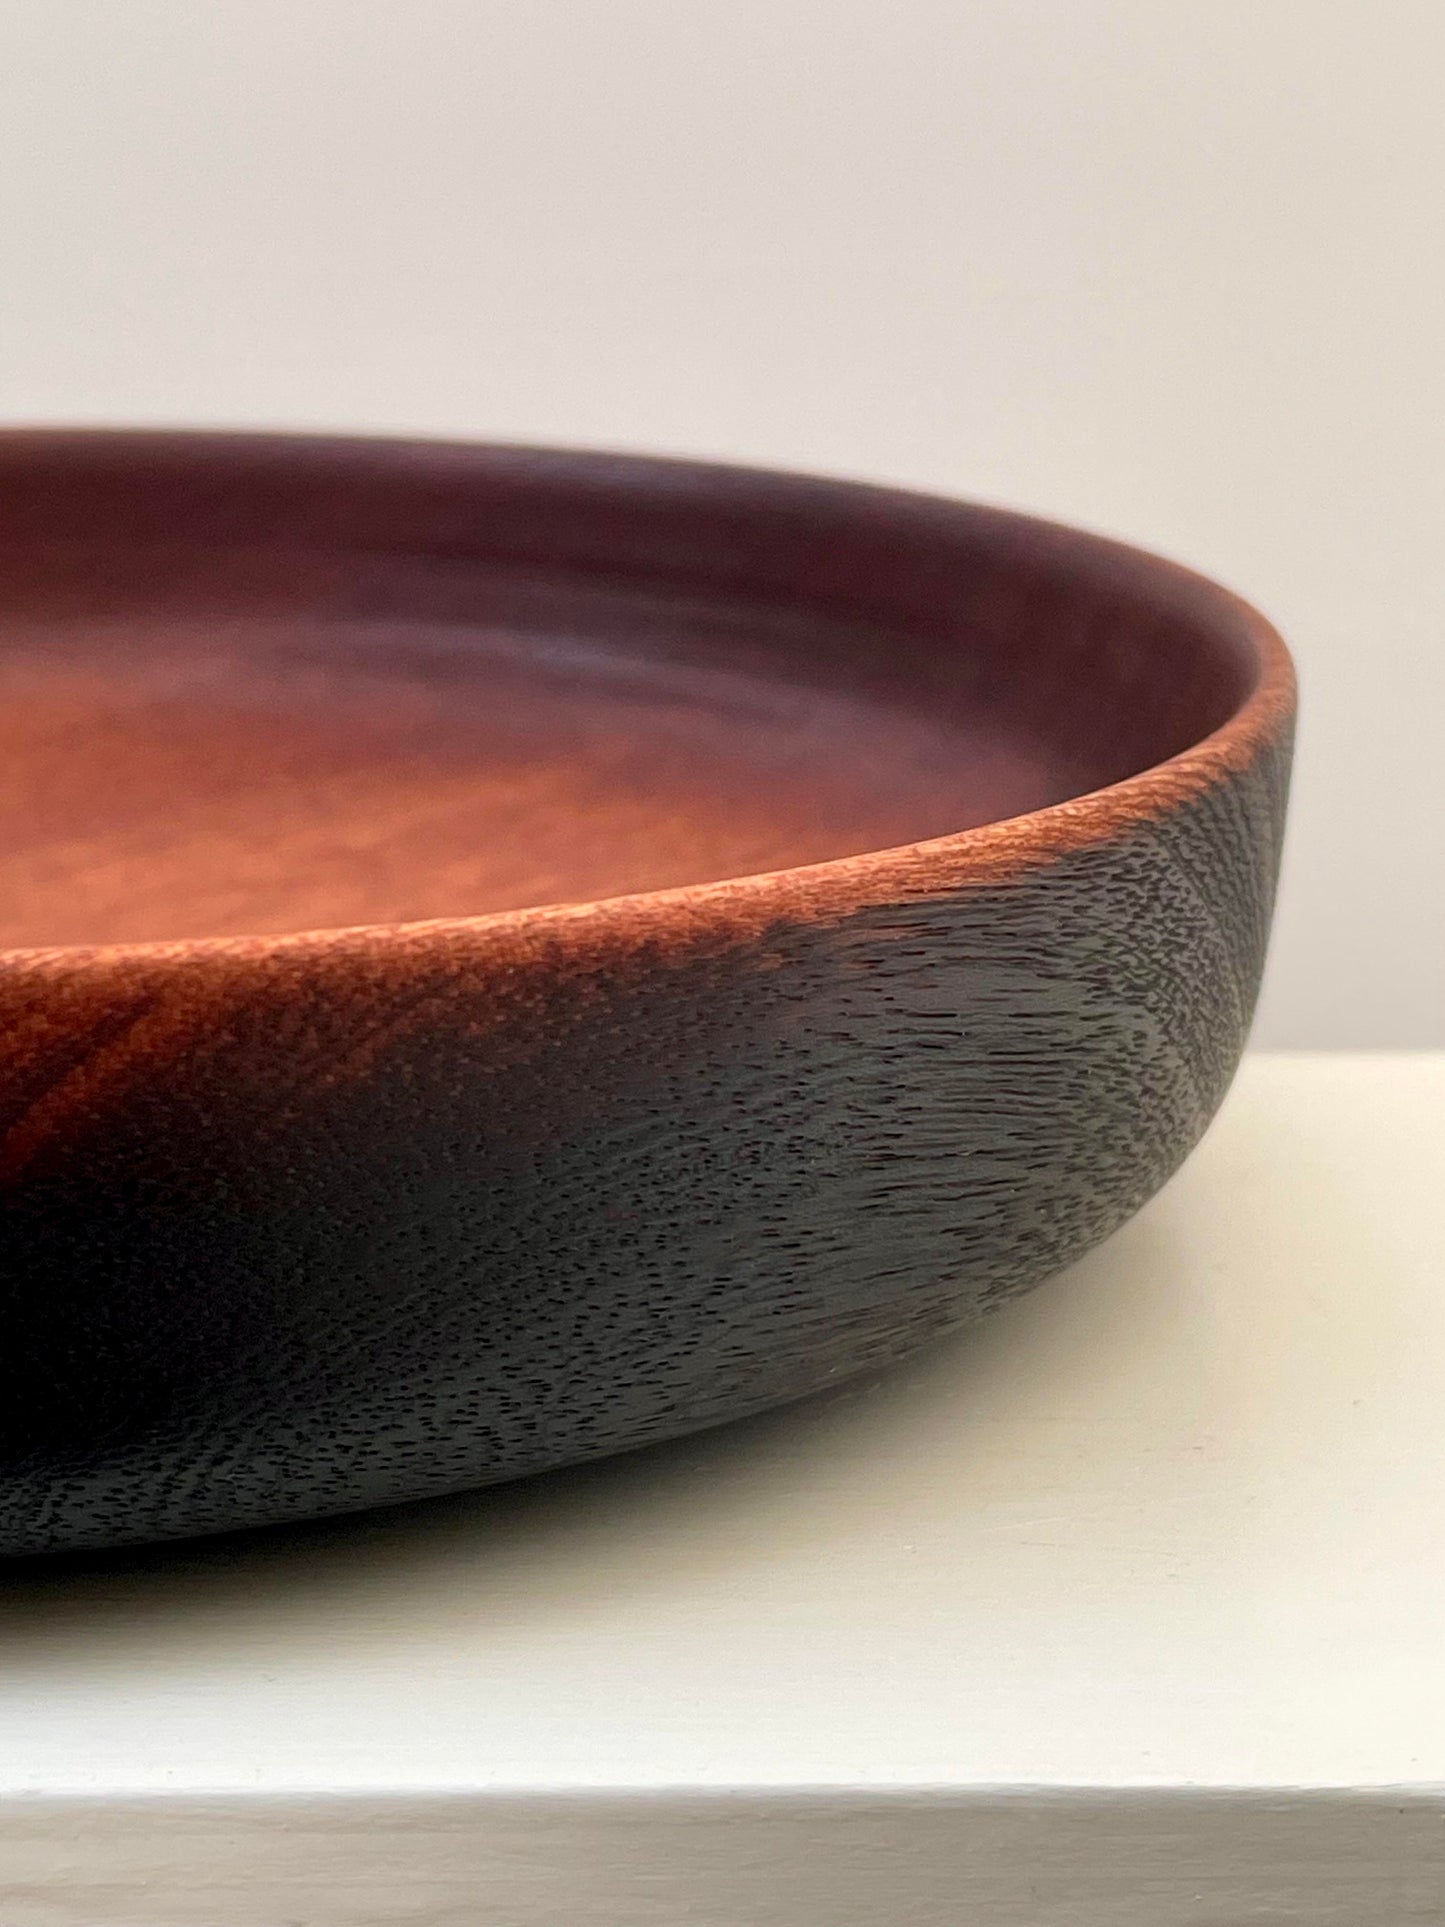 Mahogany Bowl with Scorched Exterior